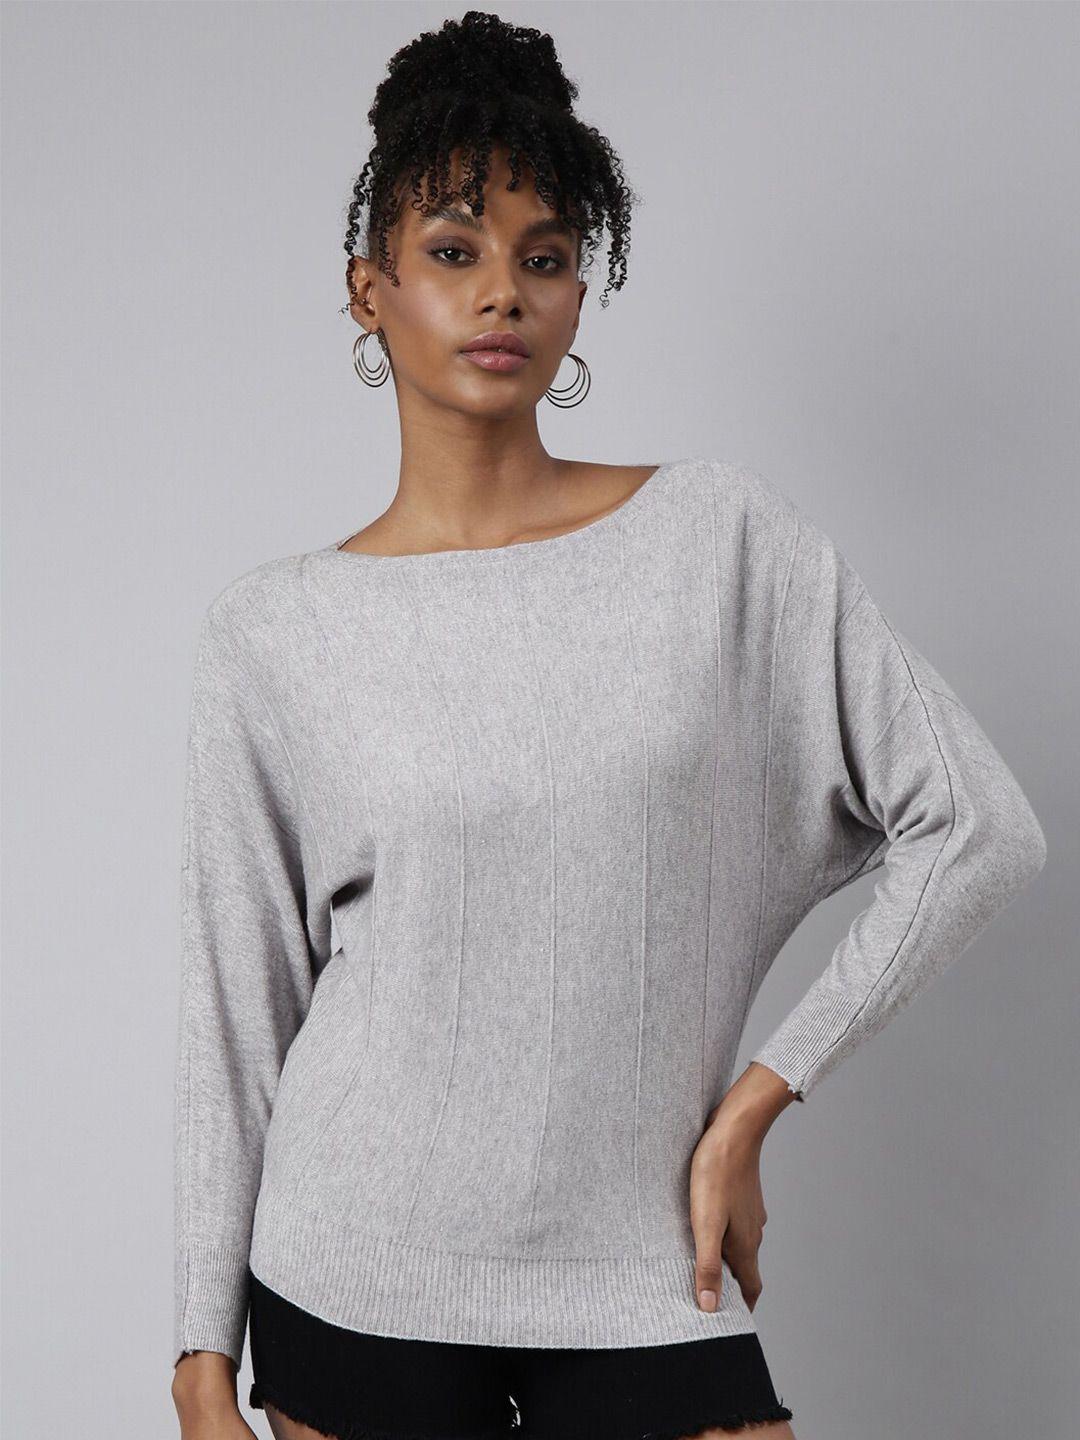 showoff-knitted-extended-sleeves-knits-top